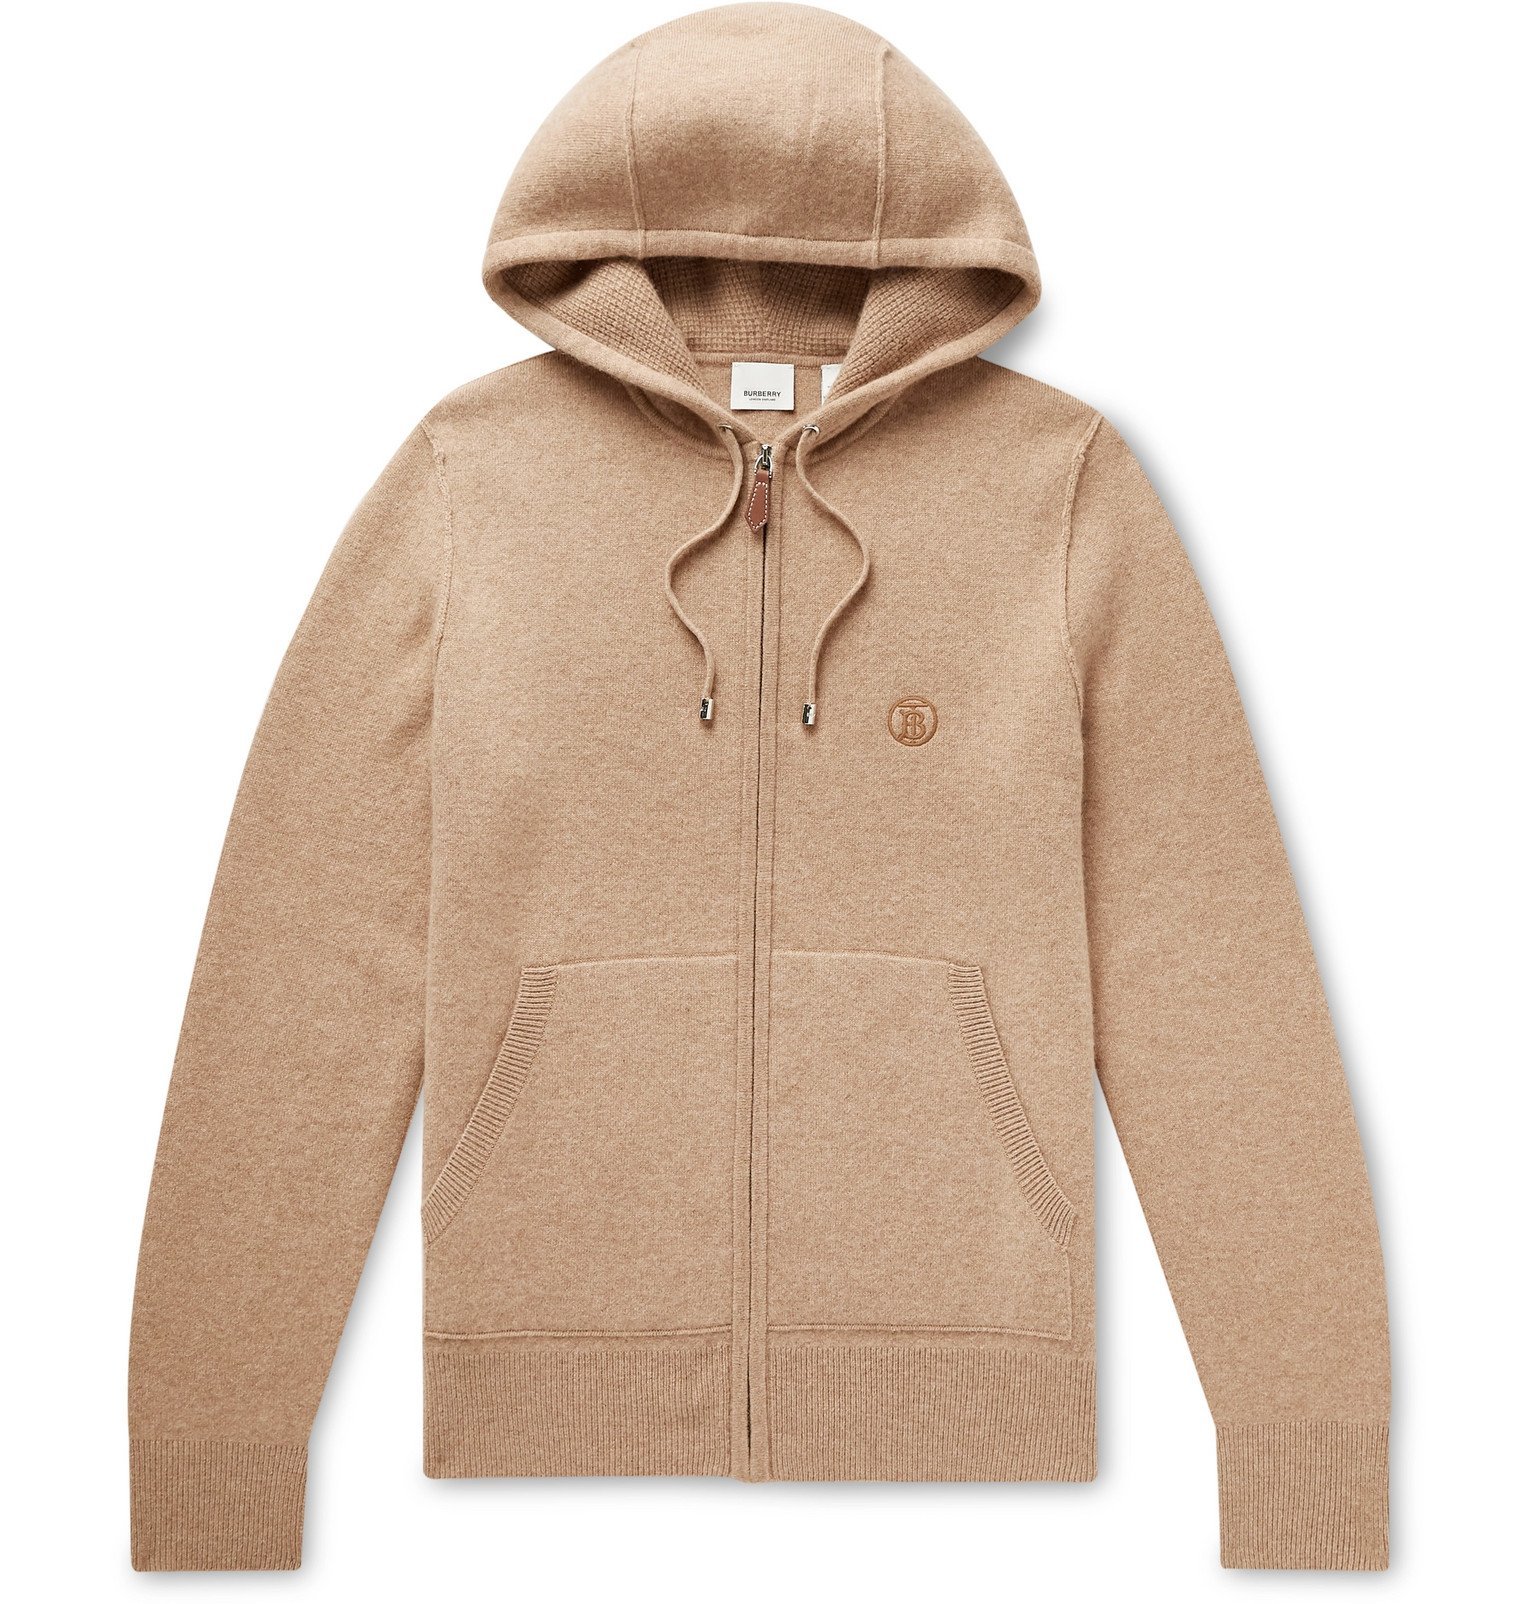 Burberry - Cashmere-Blend Zip-Up Hoodie - Brown Burberry